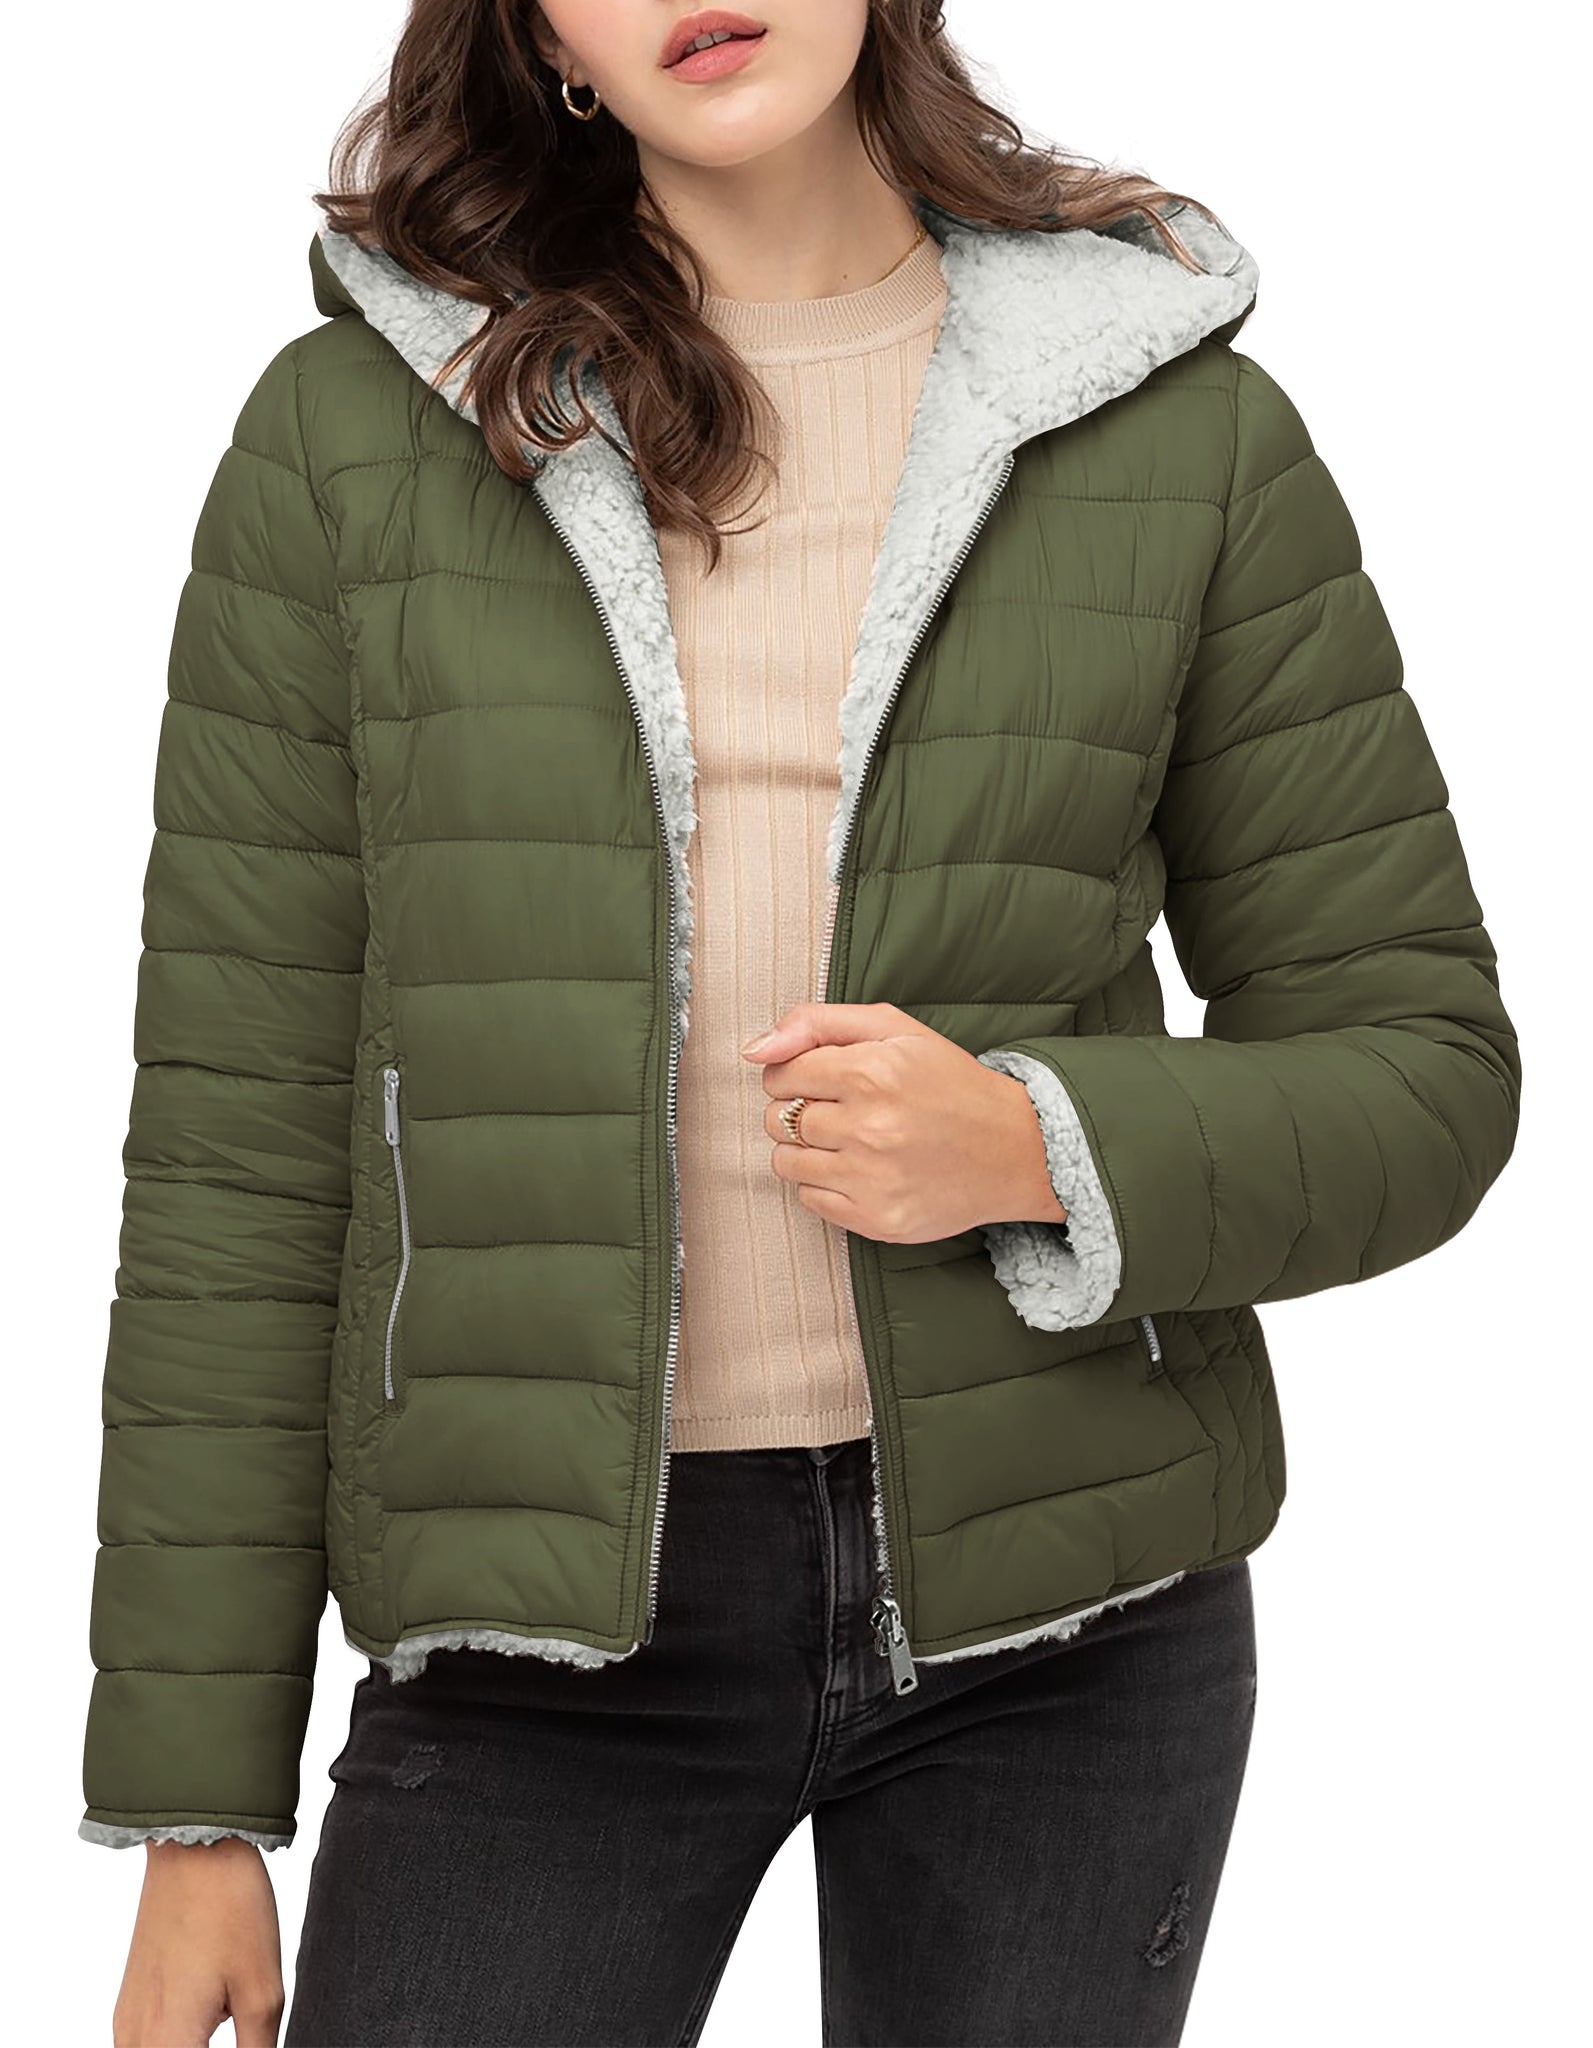 ladies_reversible_jacket_hood_fleece_white_puffer_with_fur_black_collection_water_resistance_off_white_synthetic_alternative_down_sherpa_lined_lightweight_military_parka_ski_coat_nuage_quilted_outerwear_warm_winter_fall_plush_padding_petite_mujer_chaqueta_outdoor_hike_performance_camping_commuter_short_midlength_Olive